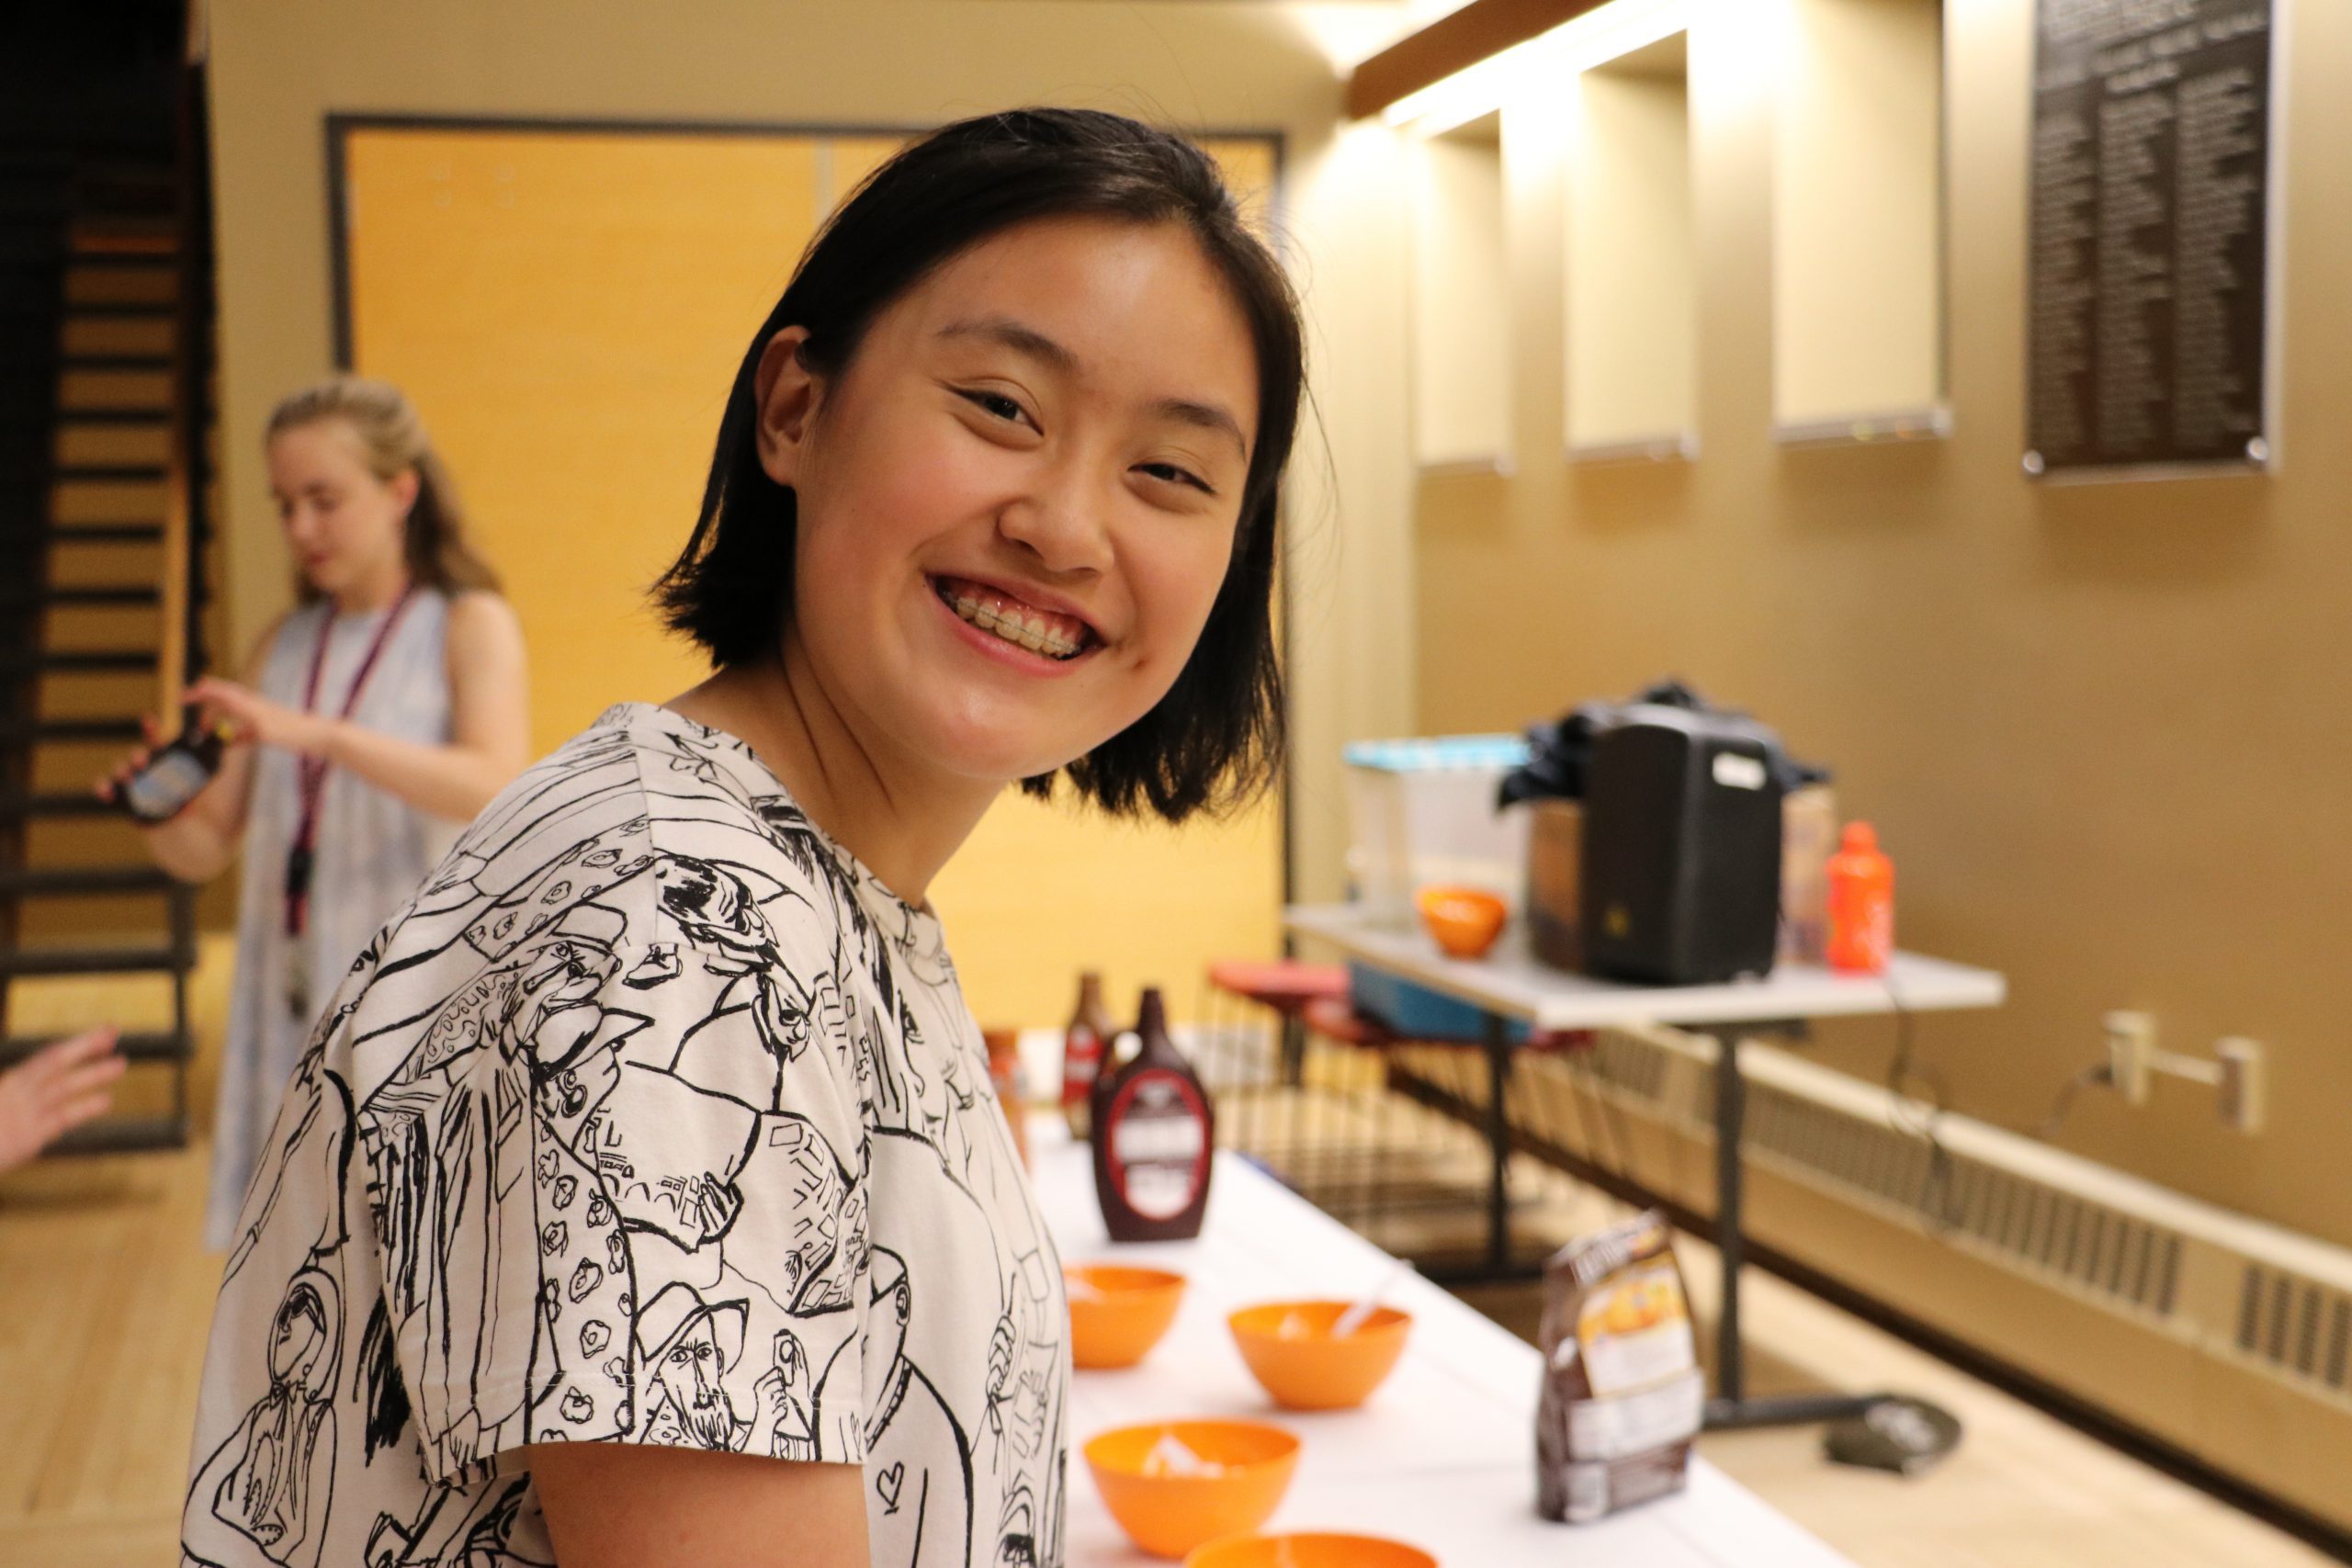 Student smiling at the camera while going through the ice cream sundae line